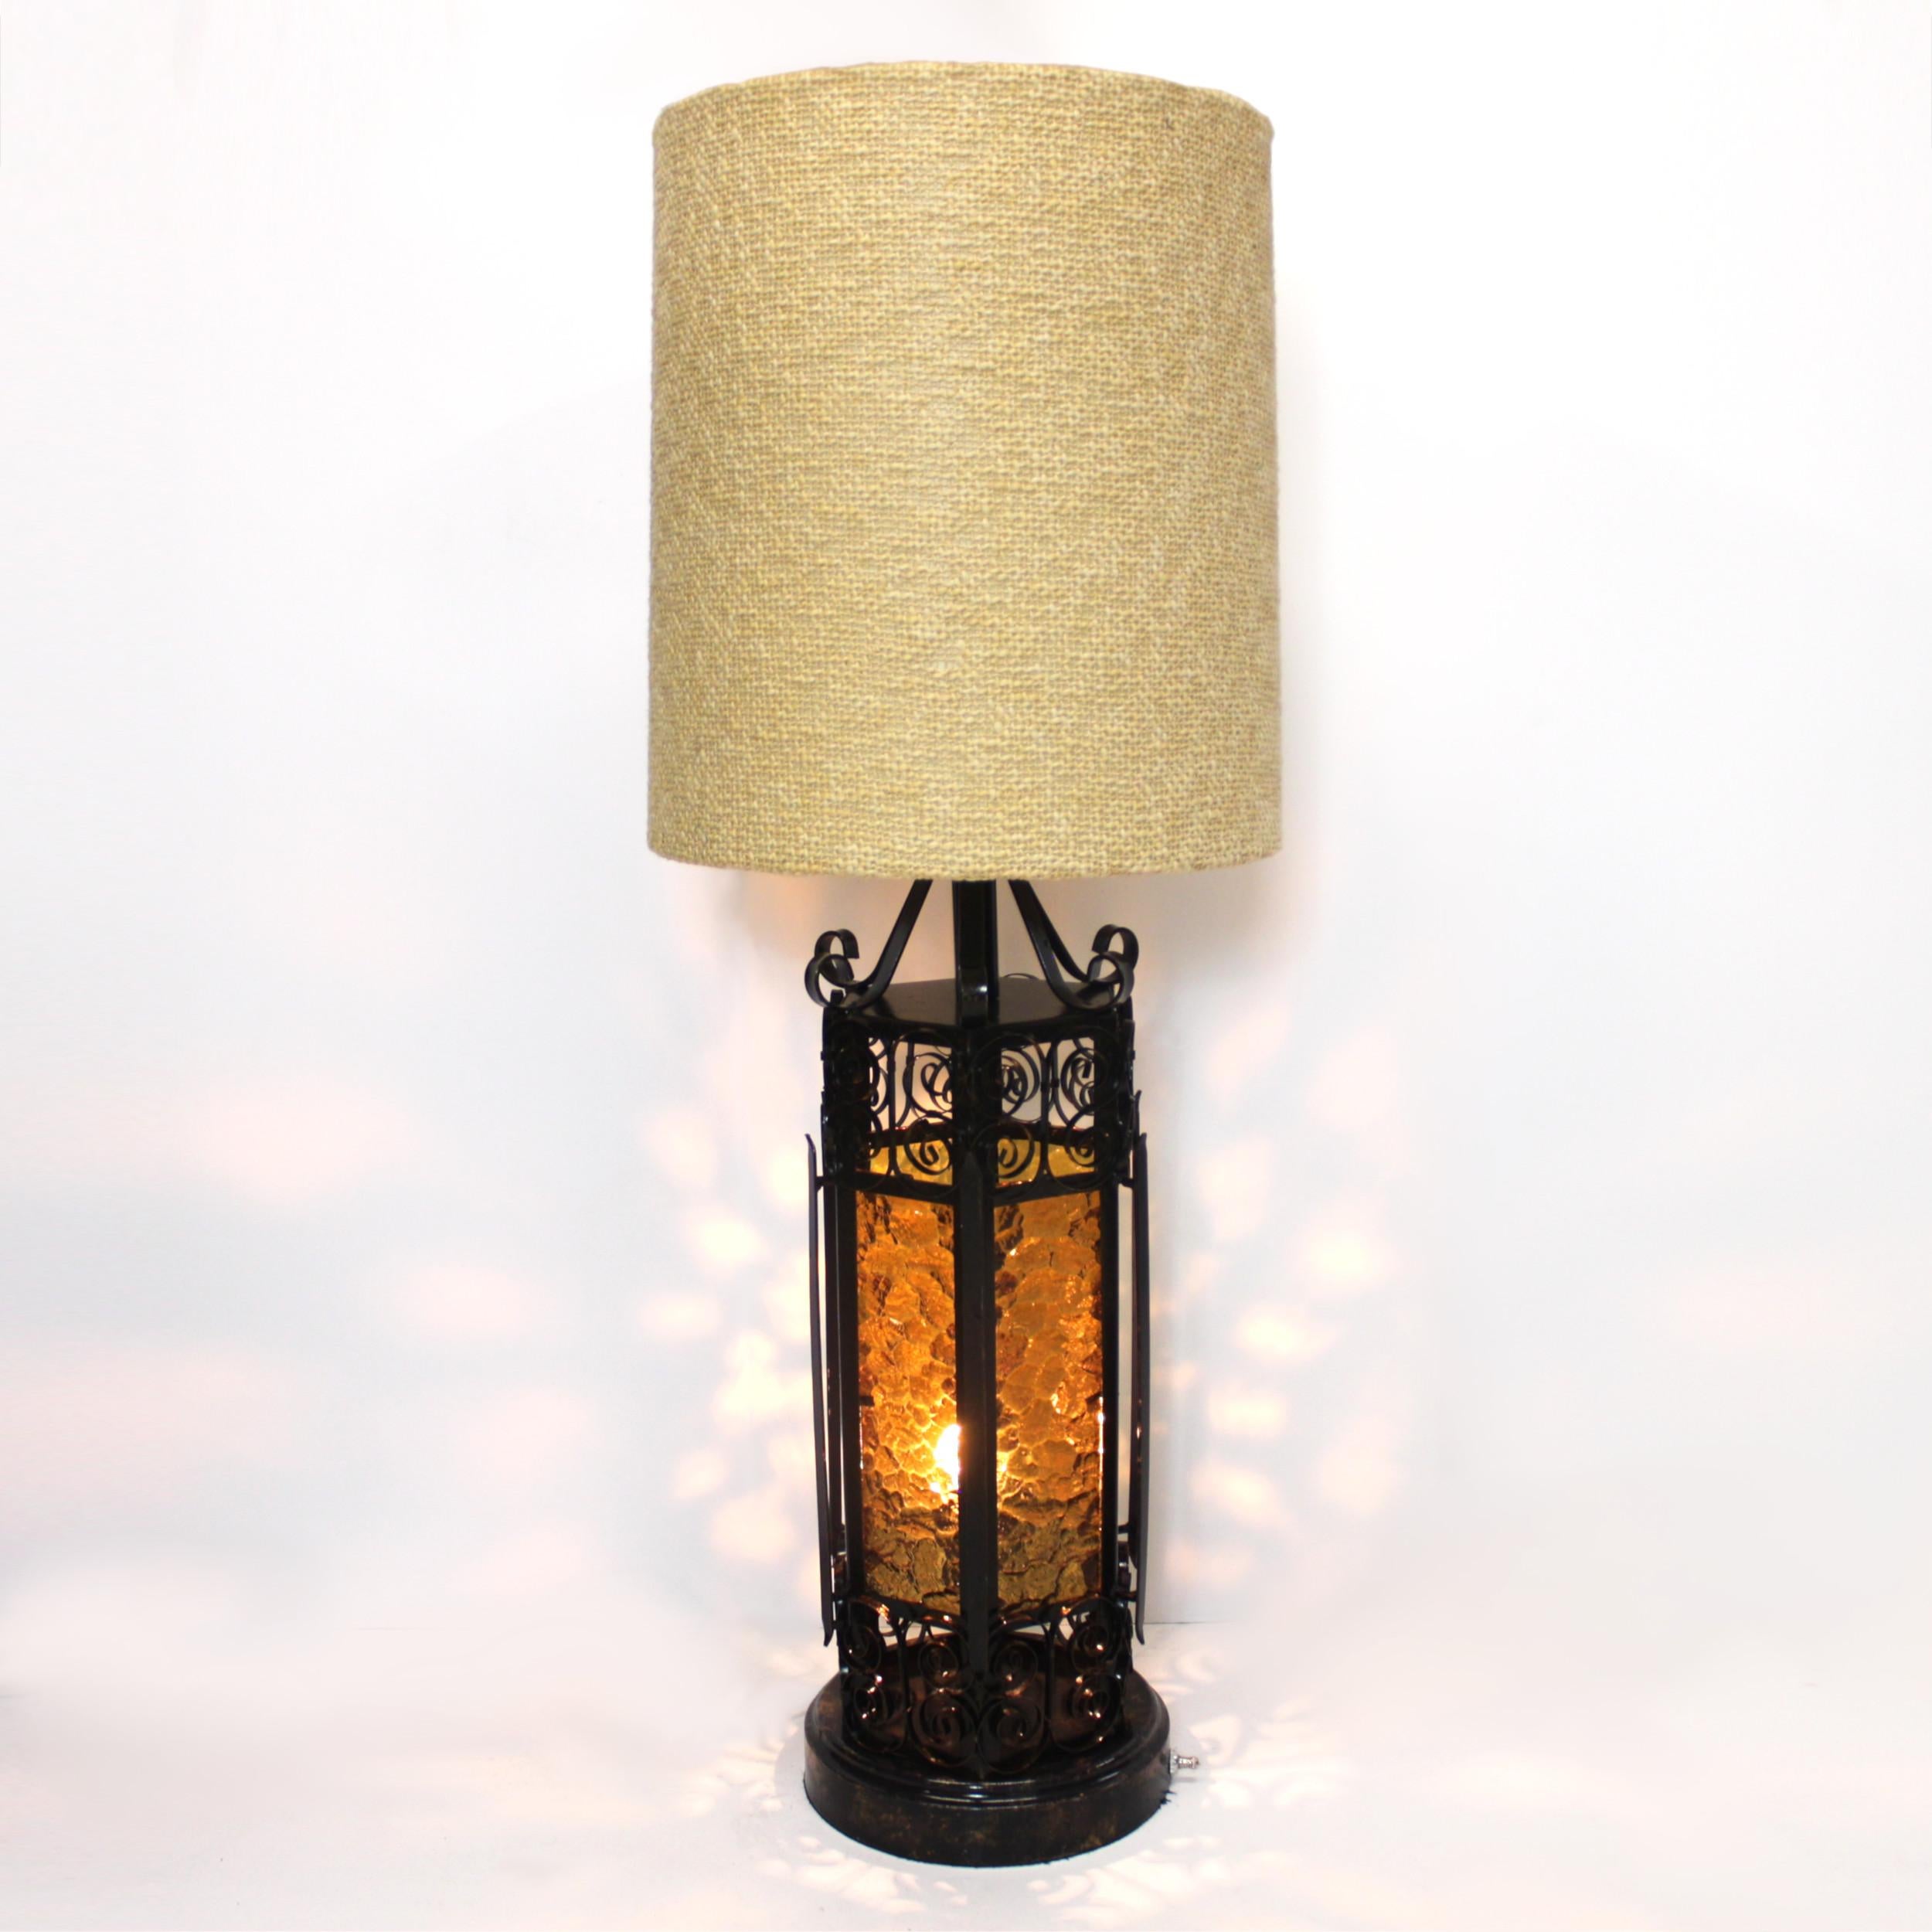 This wonderful Spanish/Mediterranean, Gothic-Revival style table lamp features an ornate wrought-steel base with amber-colored stained glass inserts. A large, 18